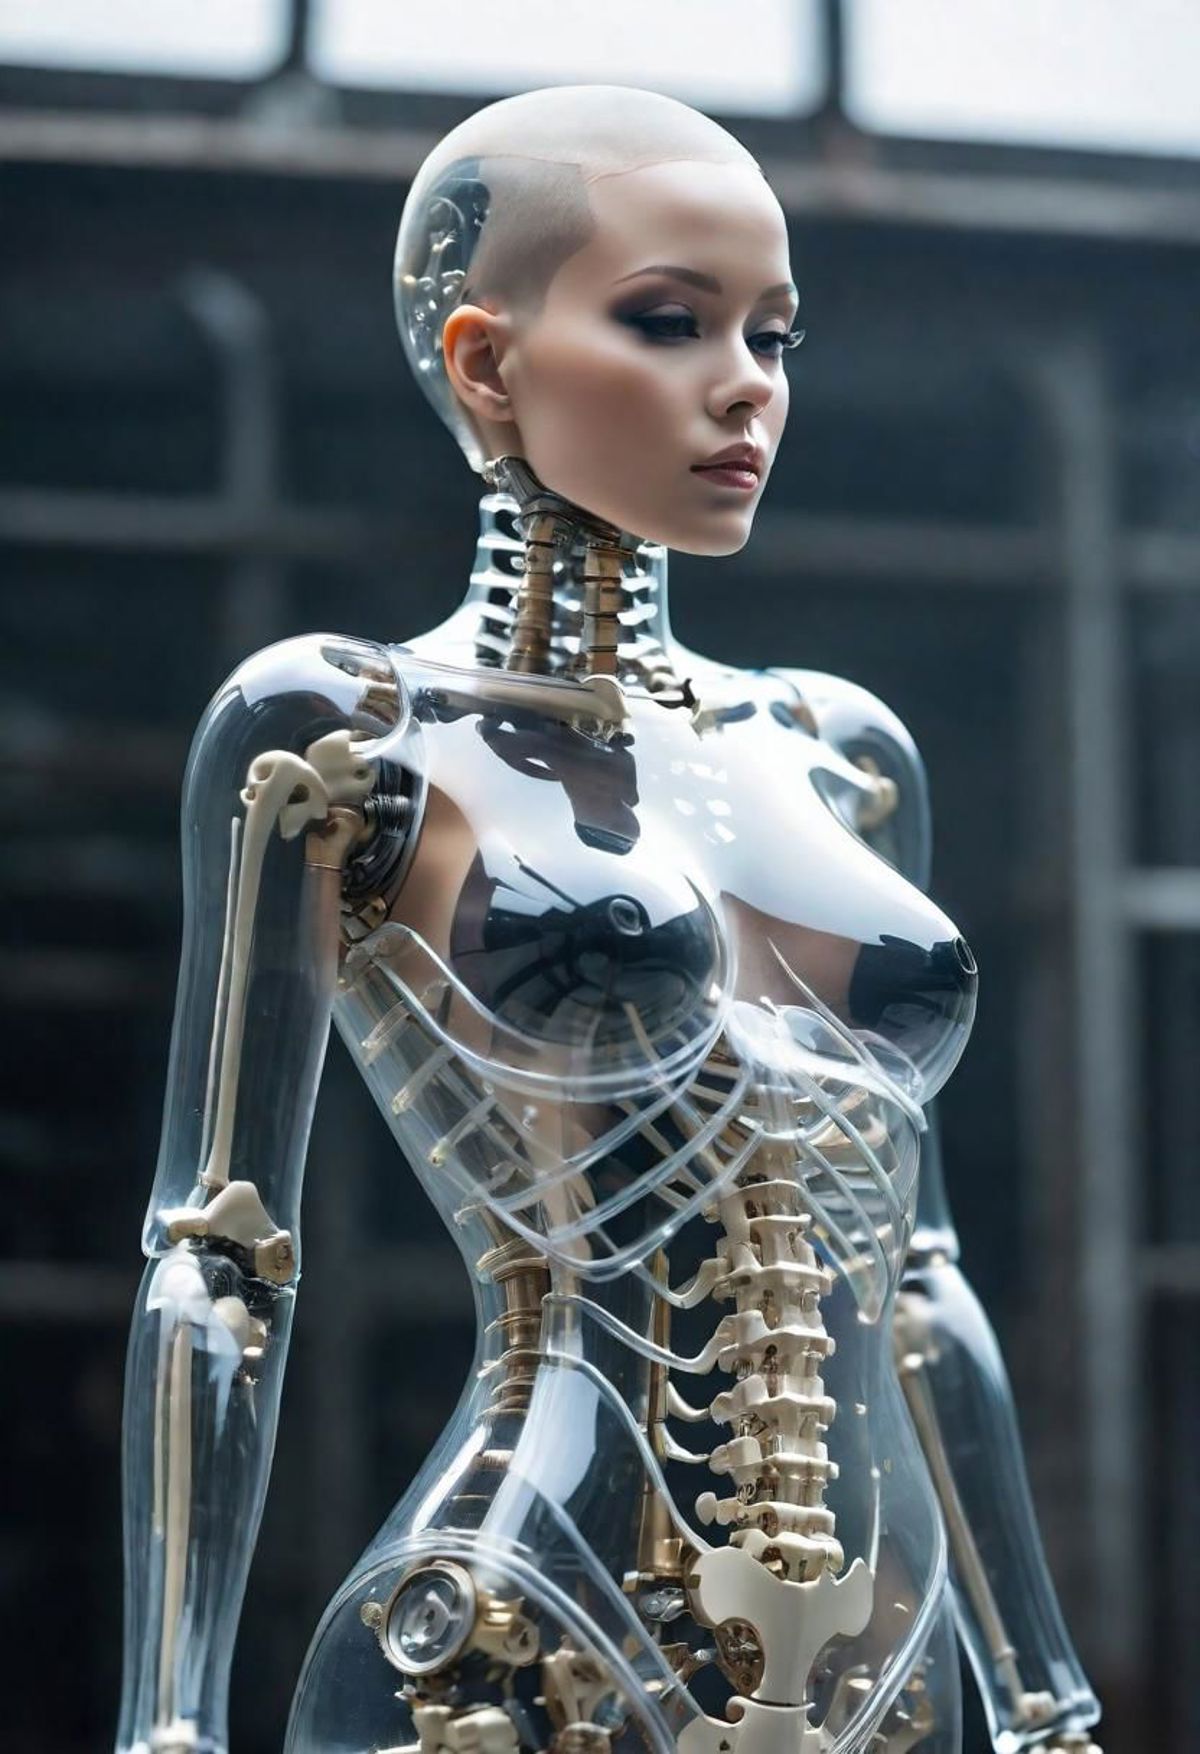 A robotic woman with a busty silicone body and skeletal remains.